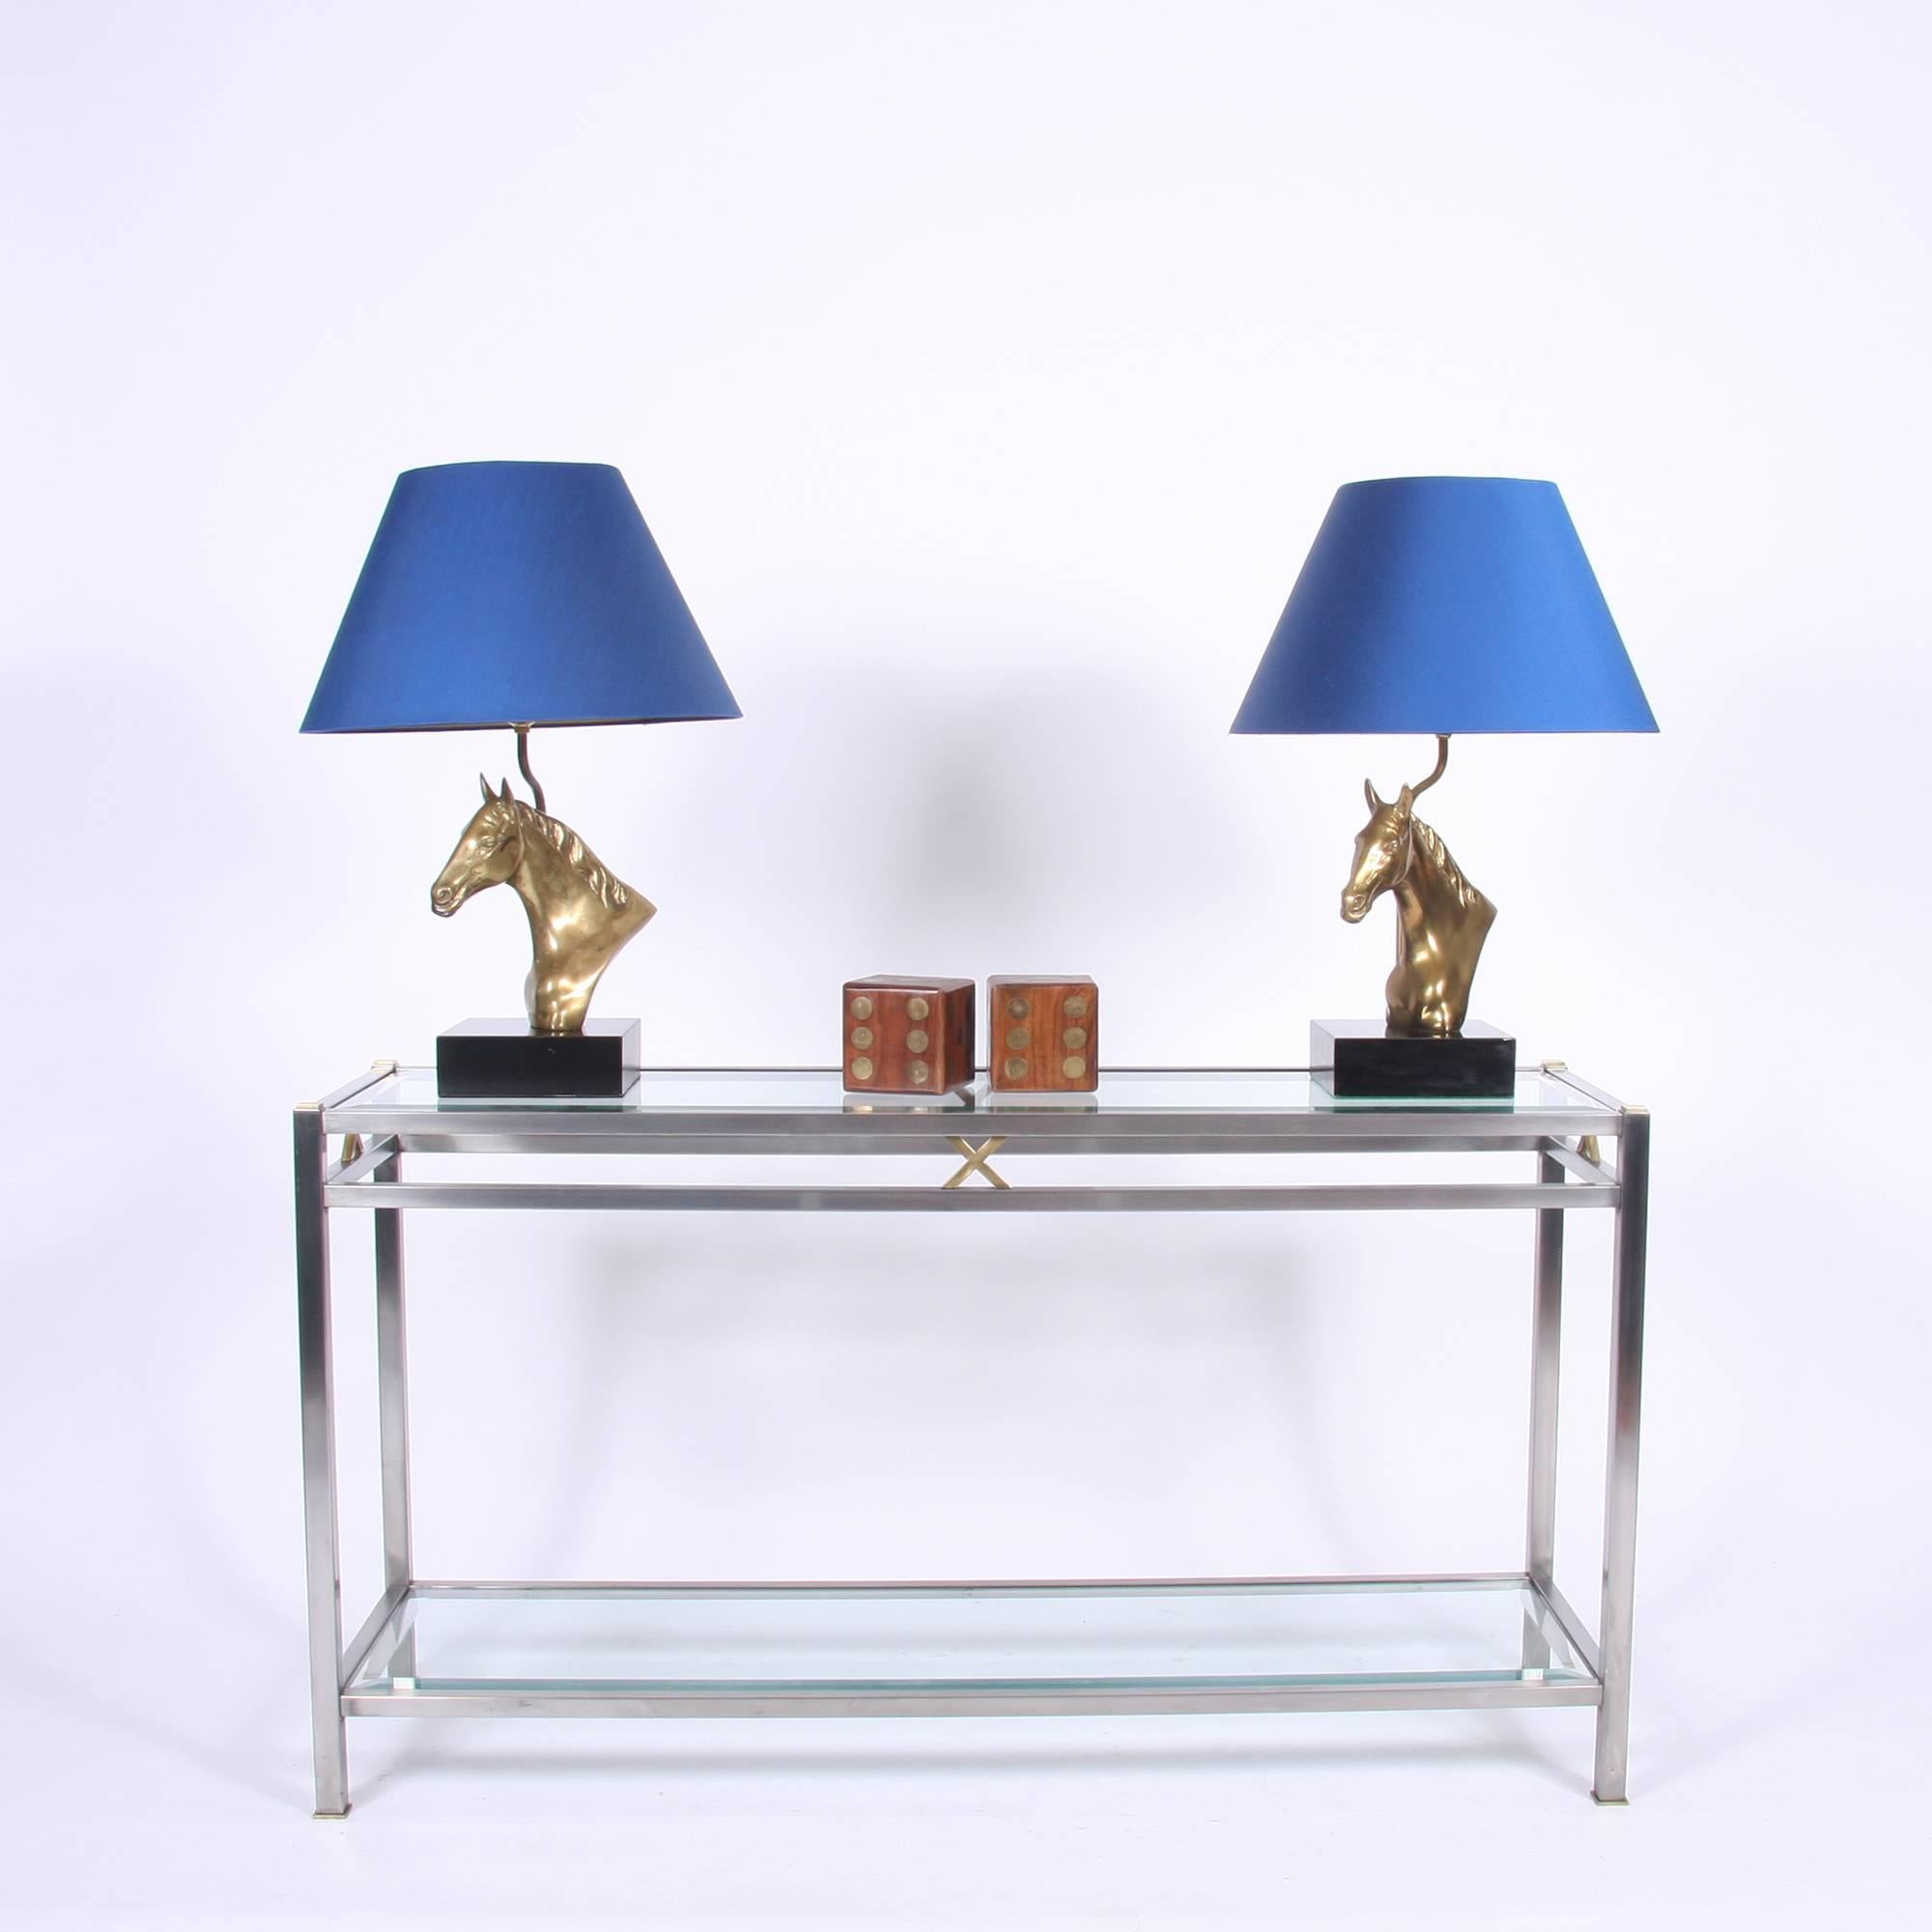 Brushed steel and brass console table, with two glass shelves, with bevelled edges. Modern and elegant, with great proportions.